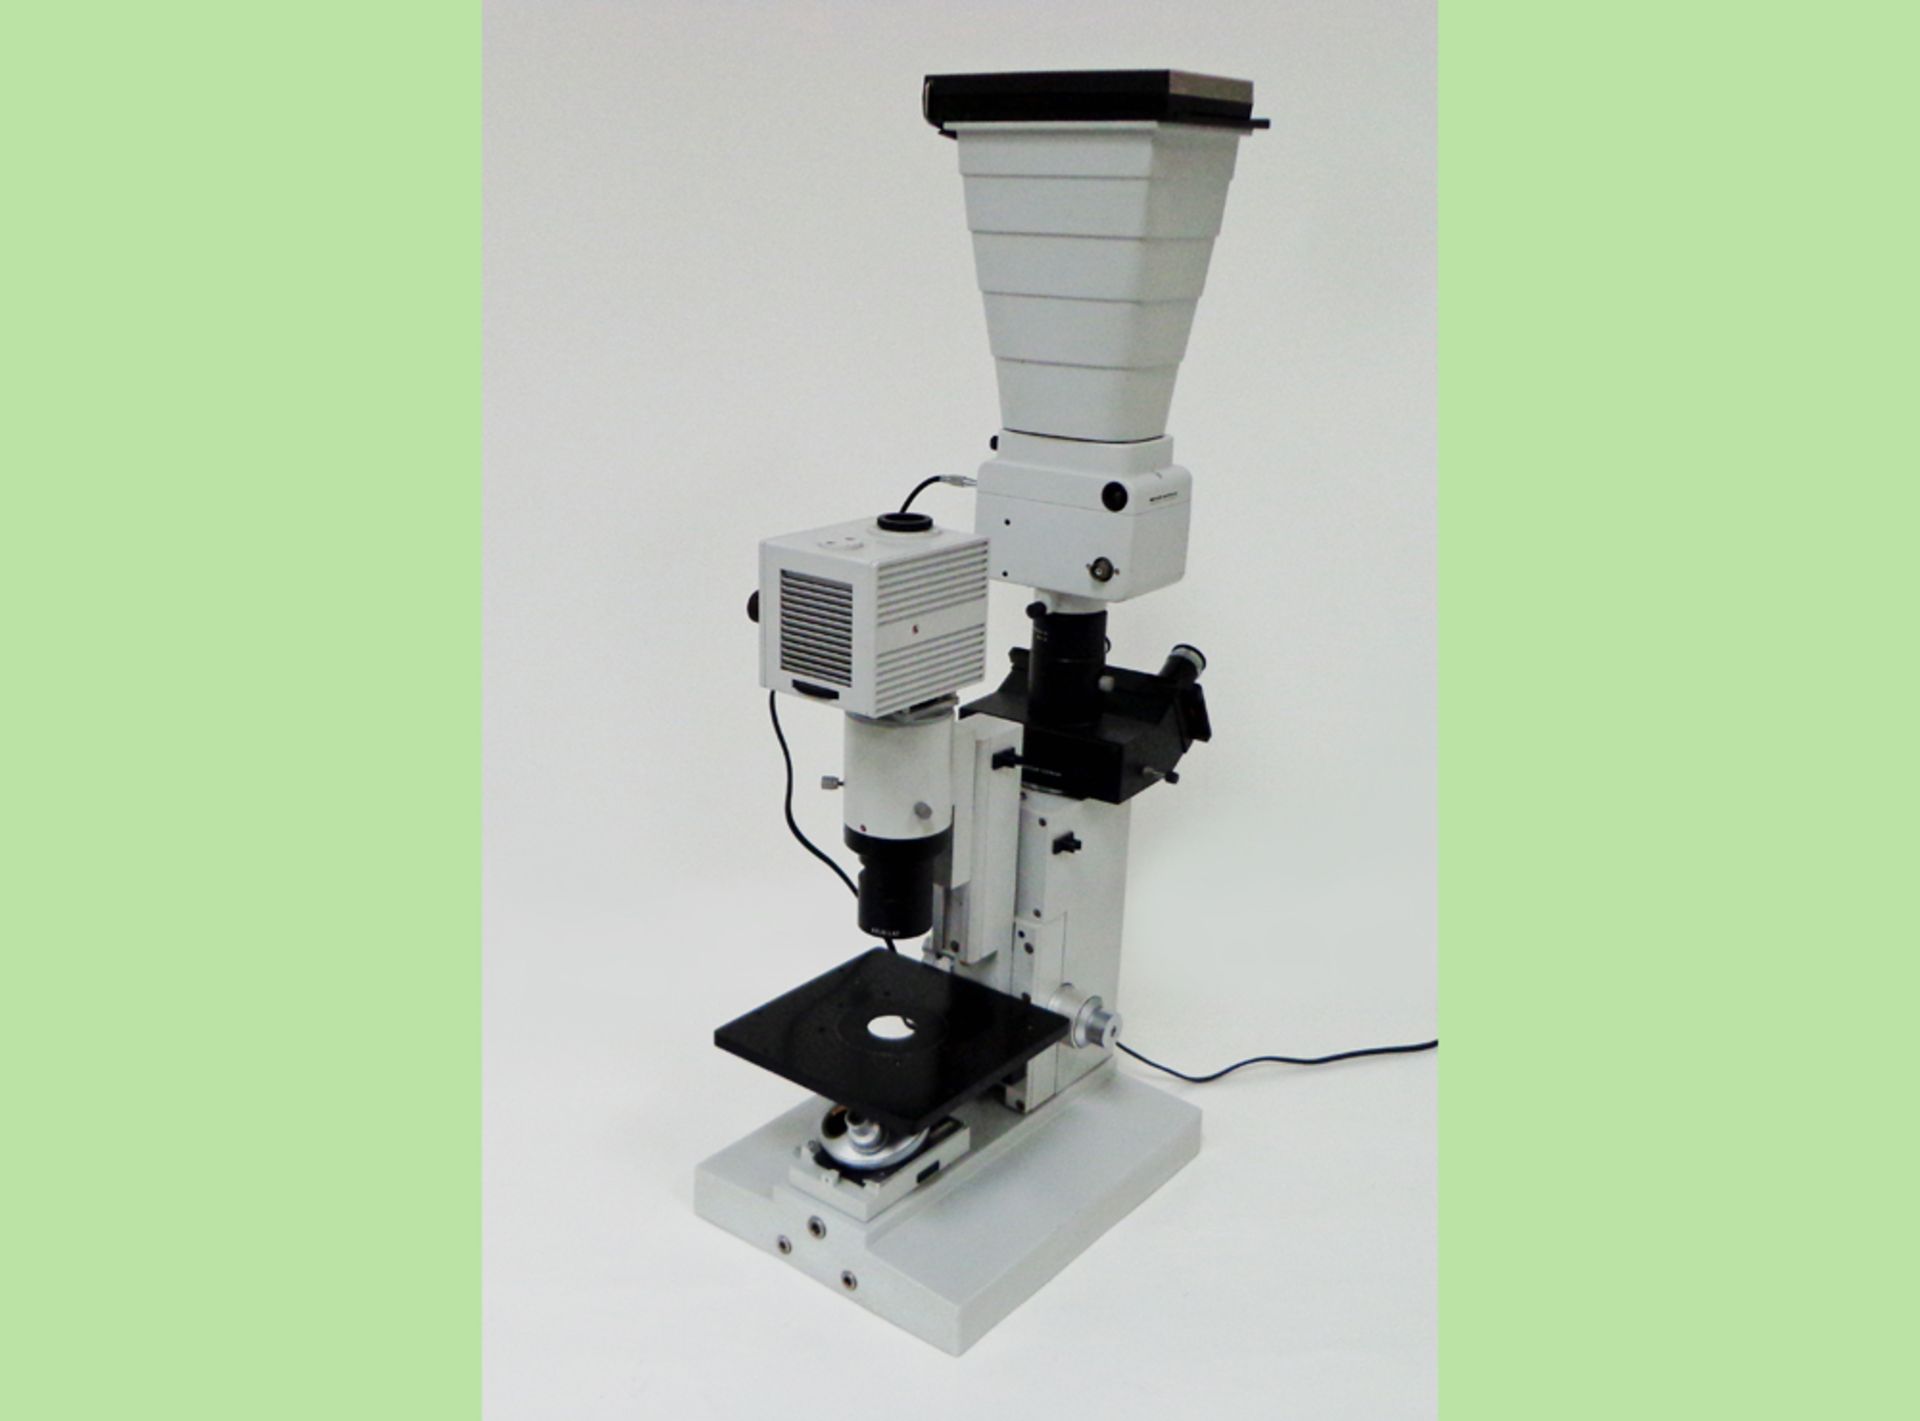 Leitz Diavert Phase Contrast Inverted Binocular Microscope with Wild (polaroid) MP511 Camera with - Image 10 of 17